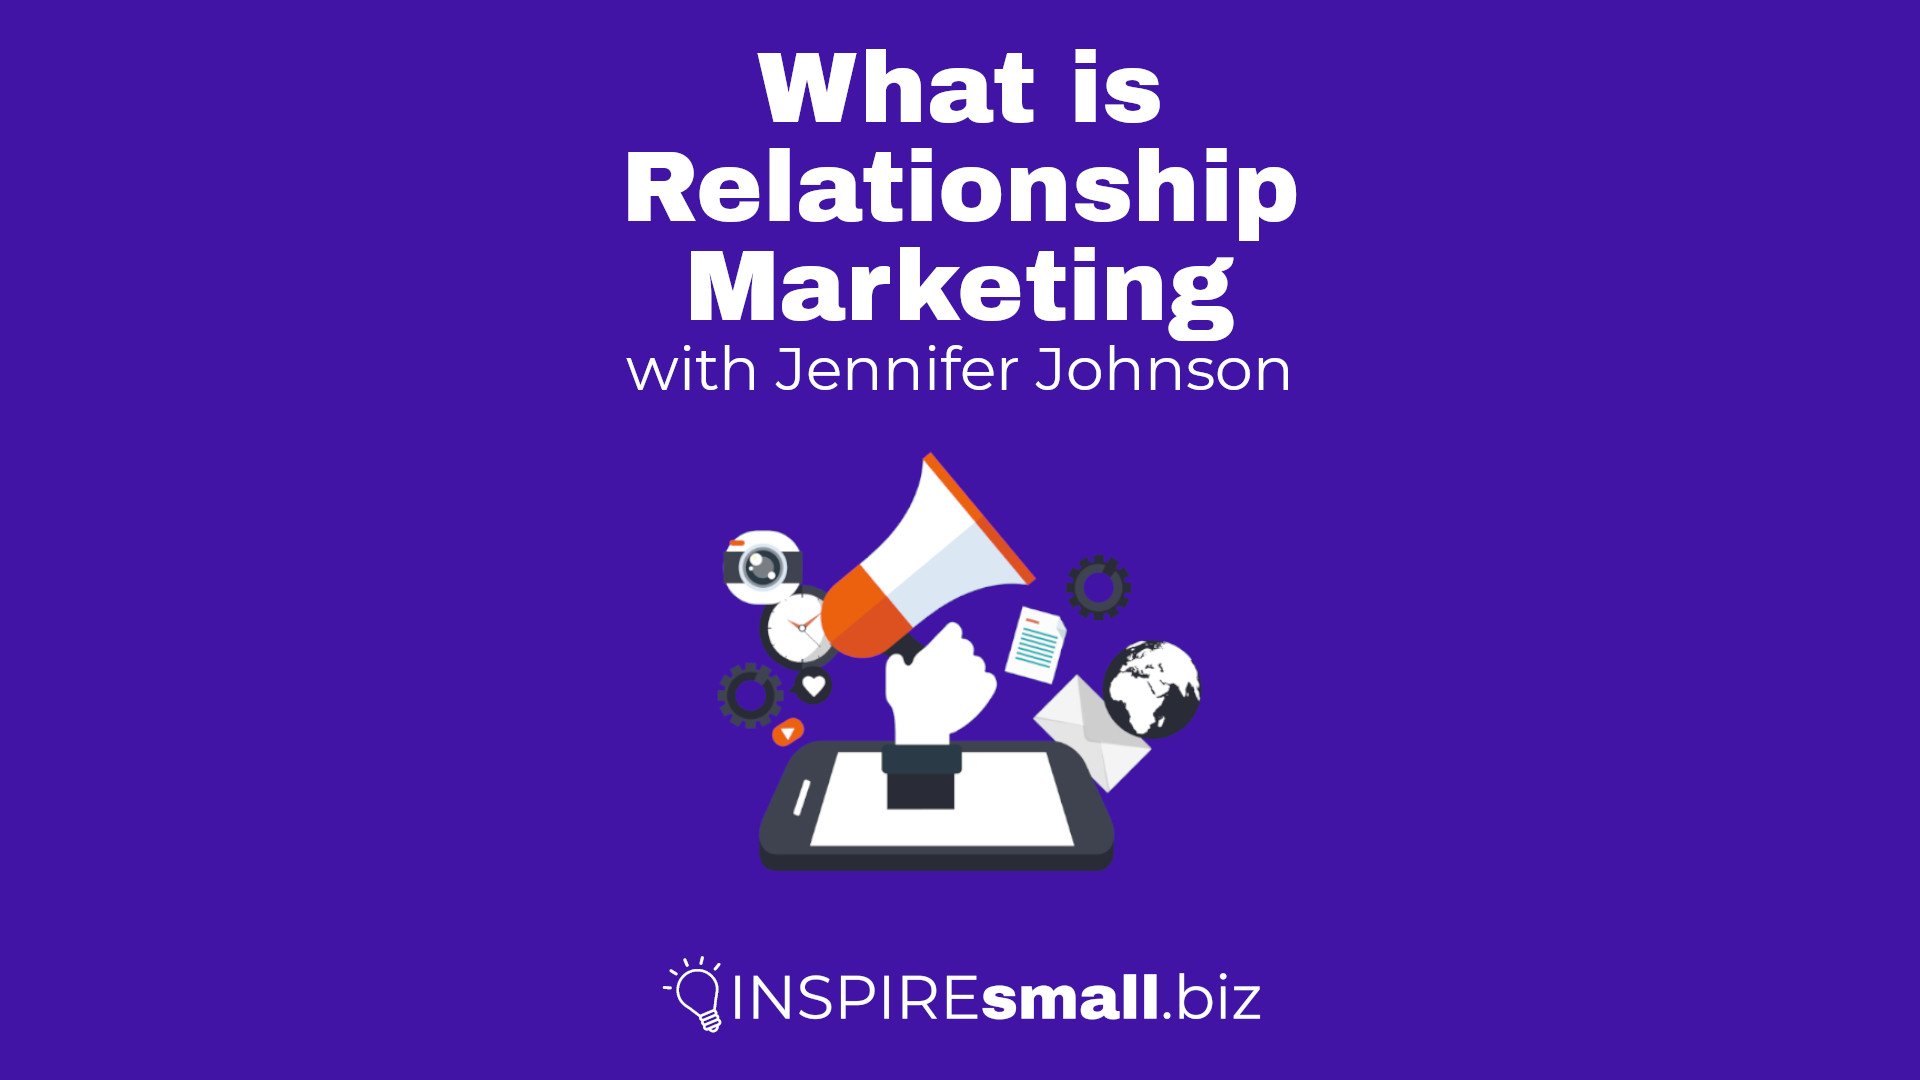 What is relationship makreting? with Jennifer Johnson, hosted by INSPIREsmall.biz